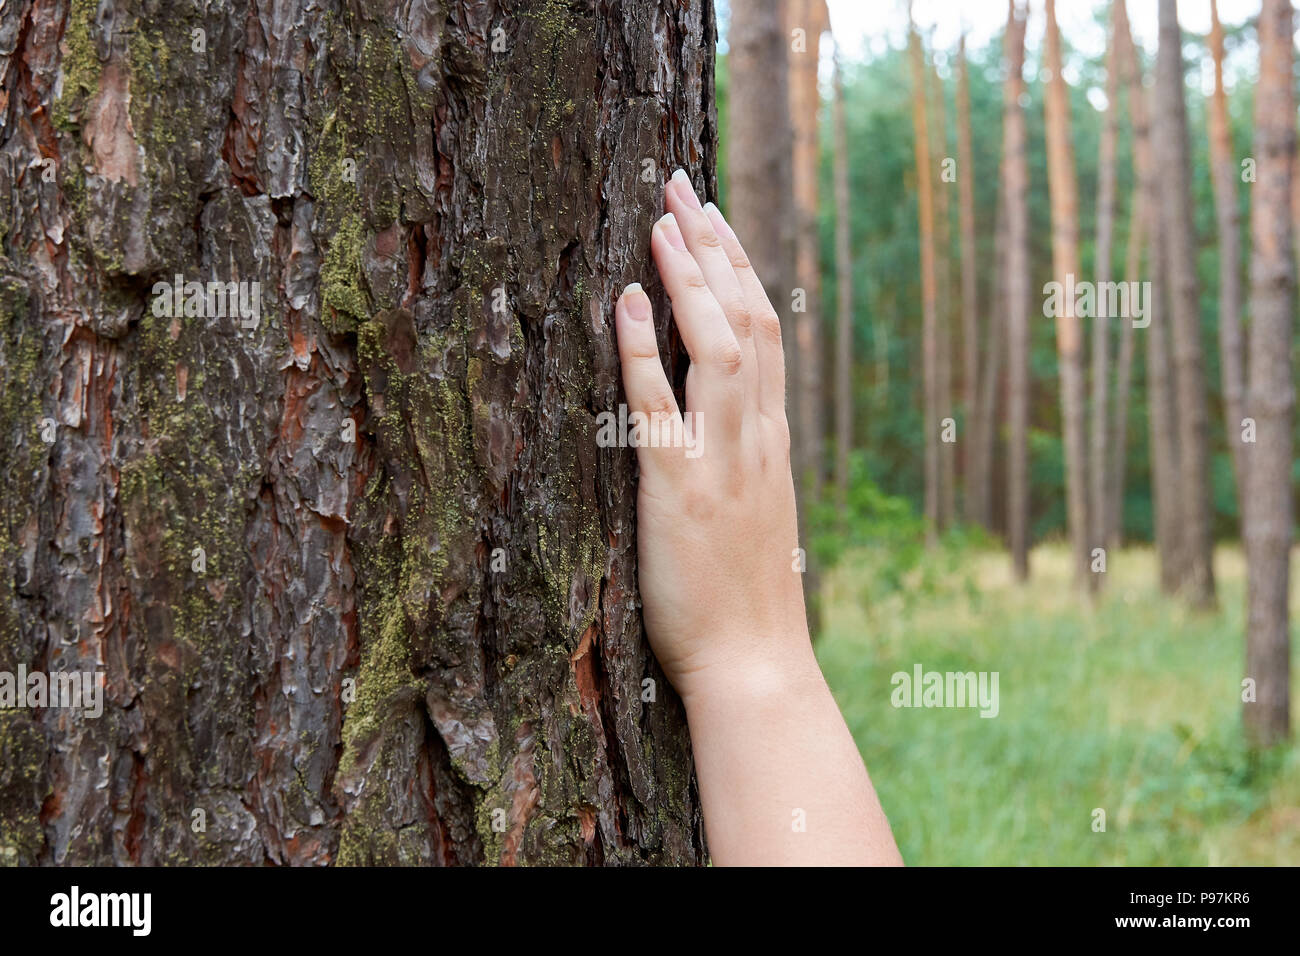 Young woman touching the hands of the trunk and the bark of a tree in the forest Stock Photo